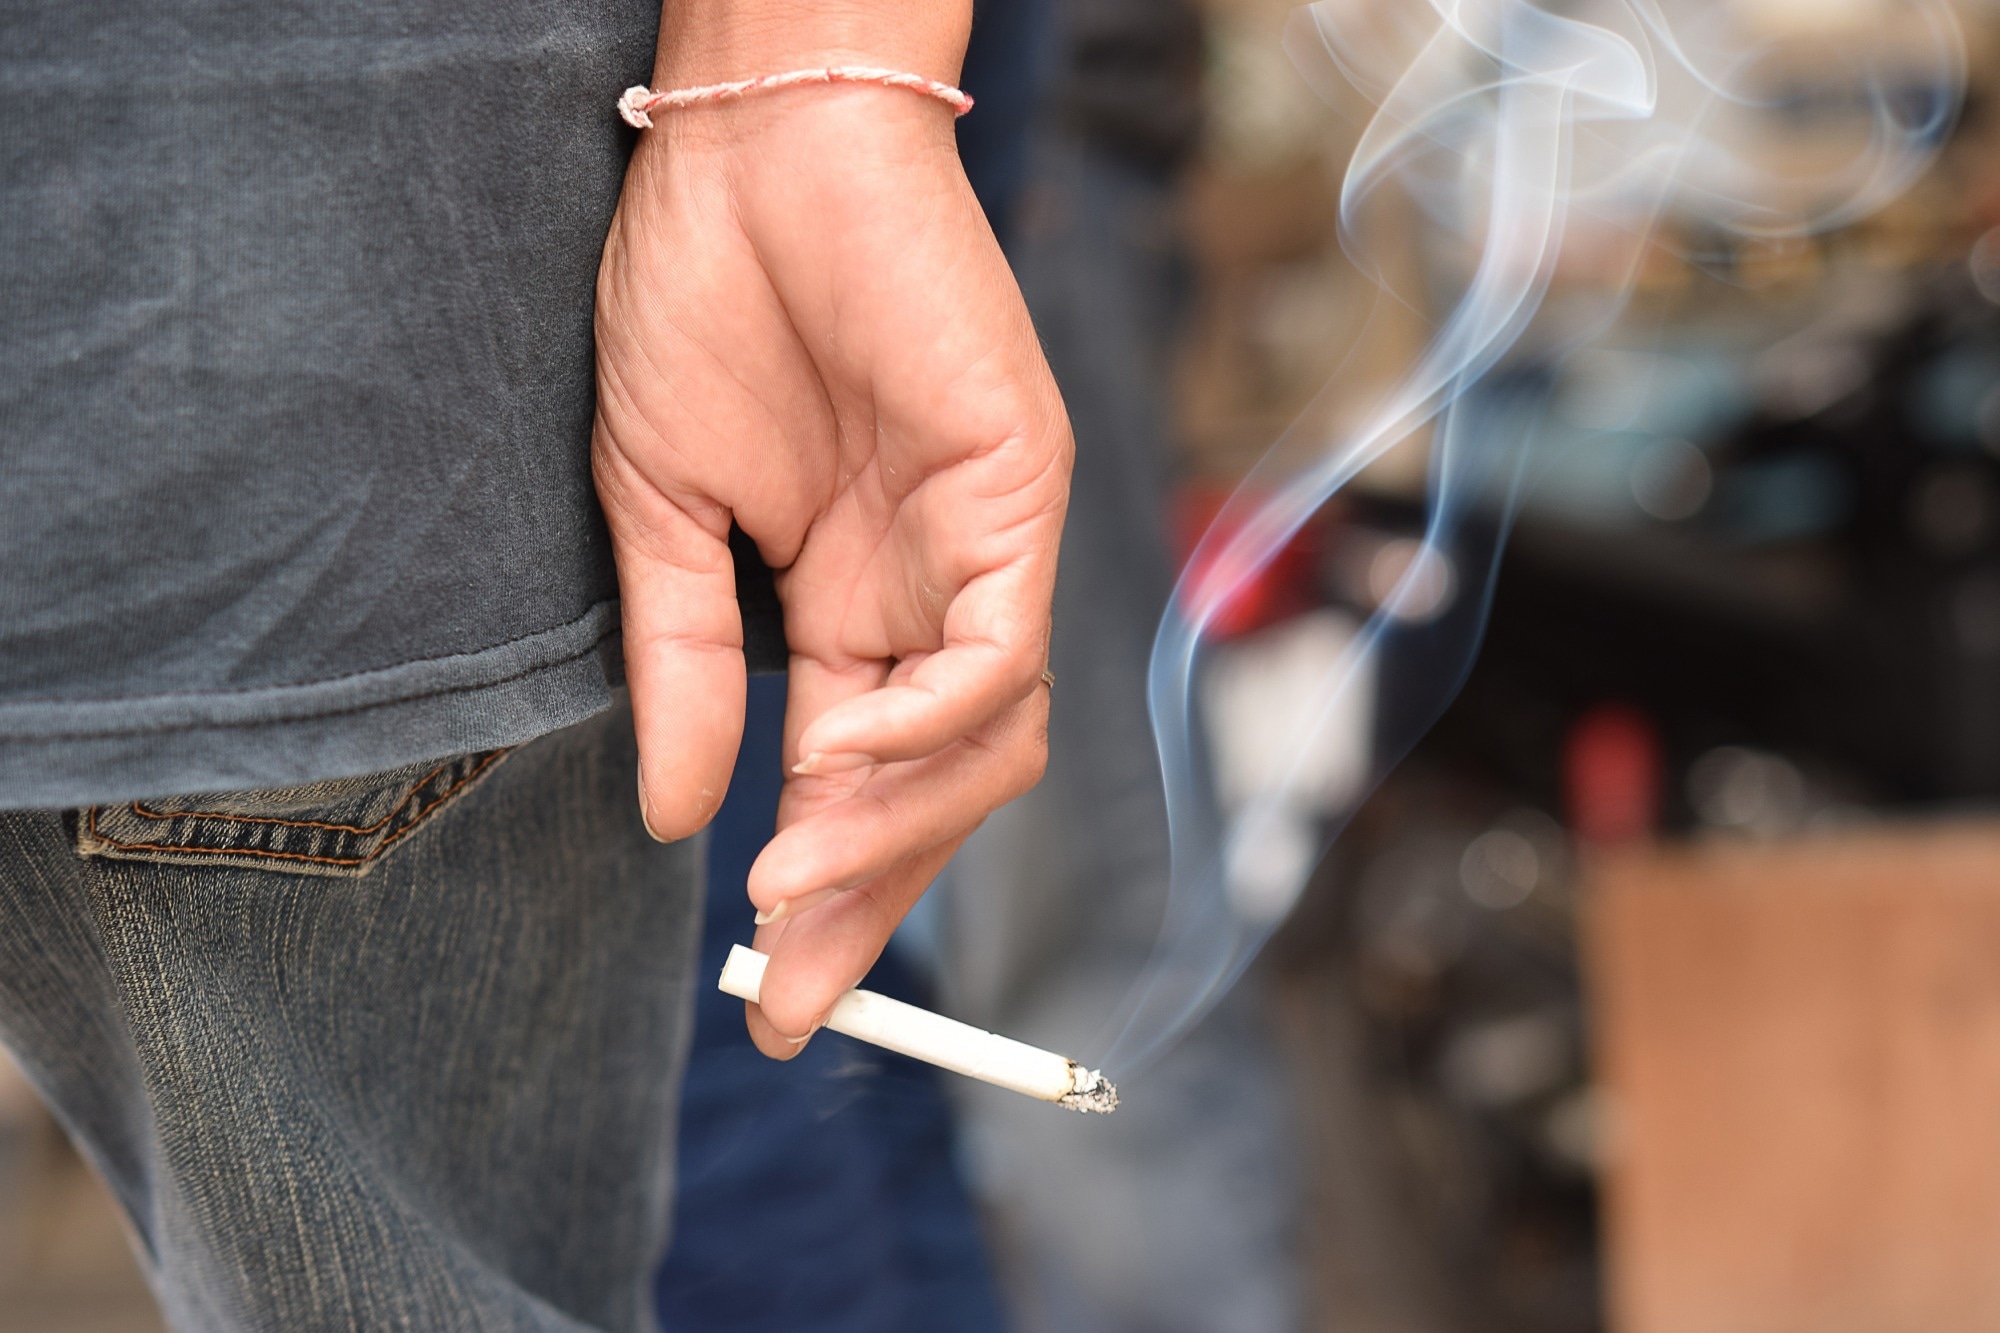 Study: Smoking Induces a Decline in Semen Quality and the Activation of Stress Response Pathways in Sperm. Image Credit: Oteera / Shutterstock